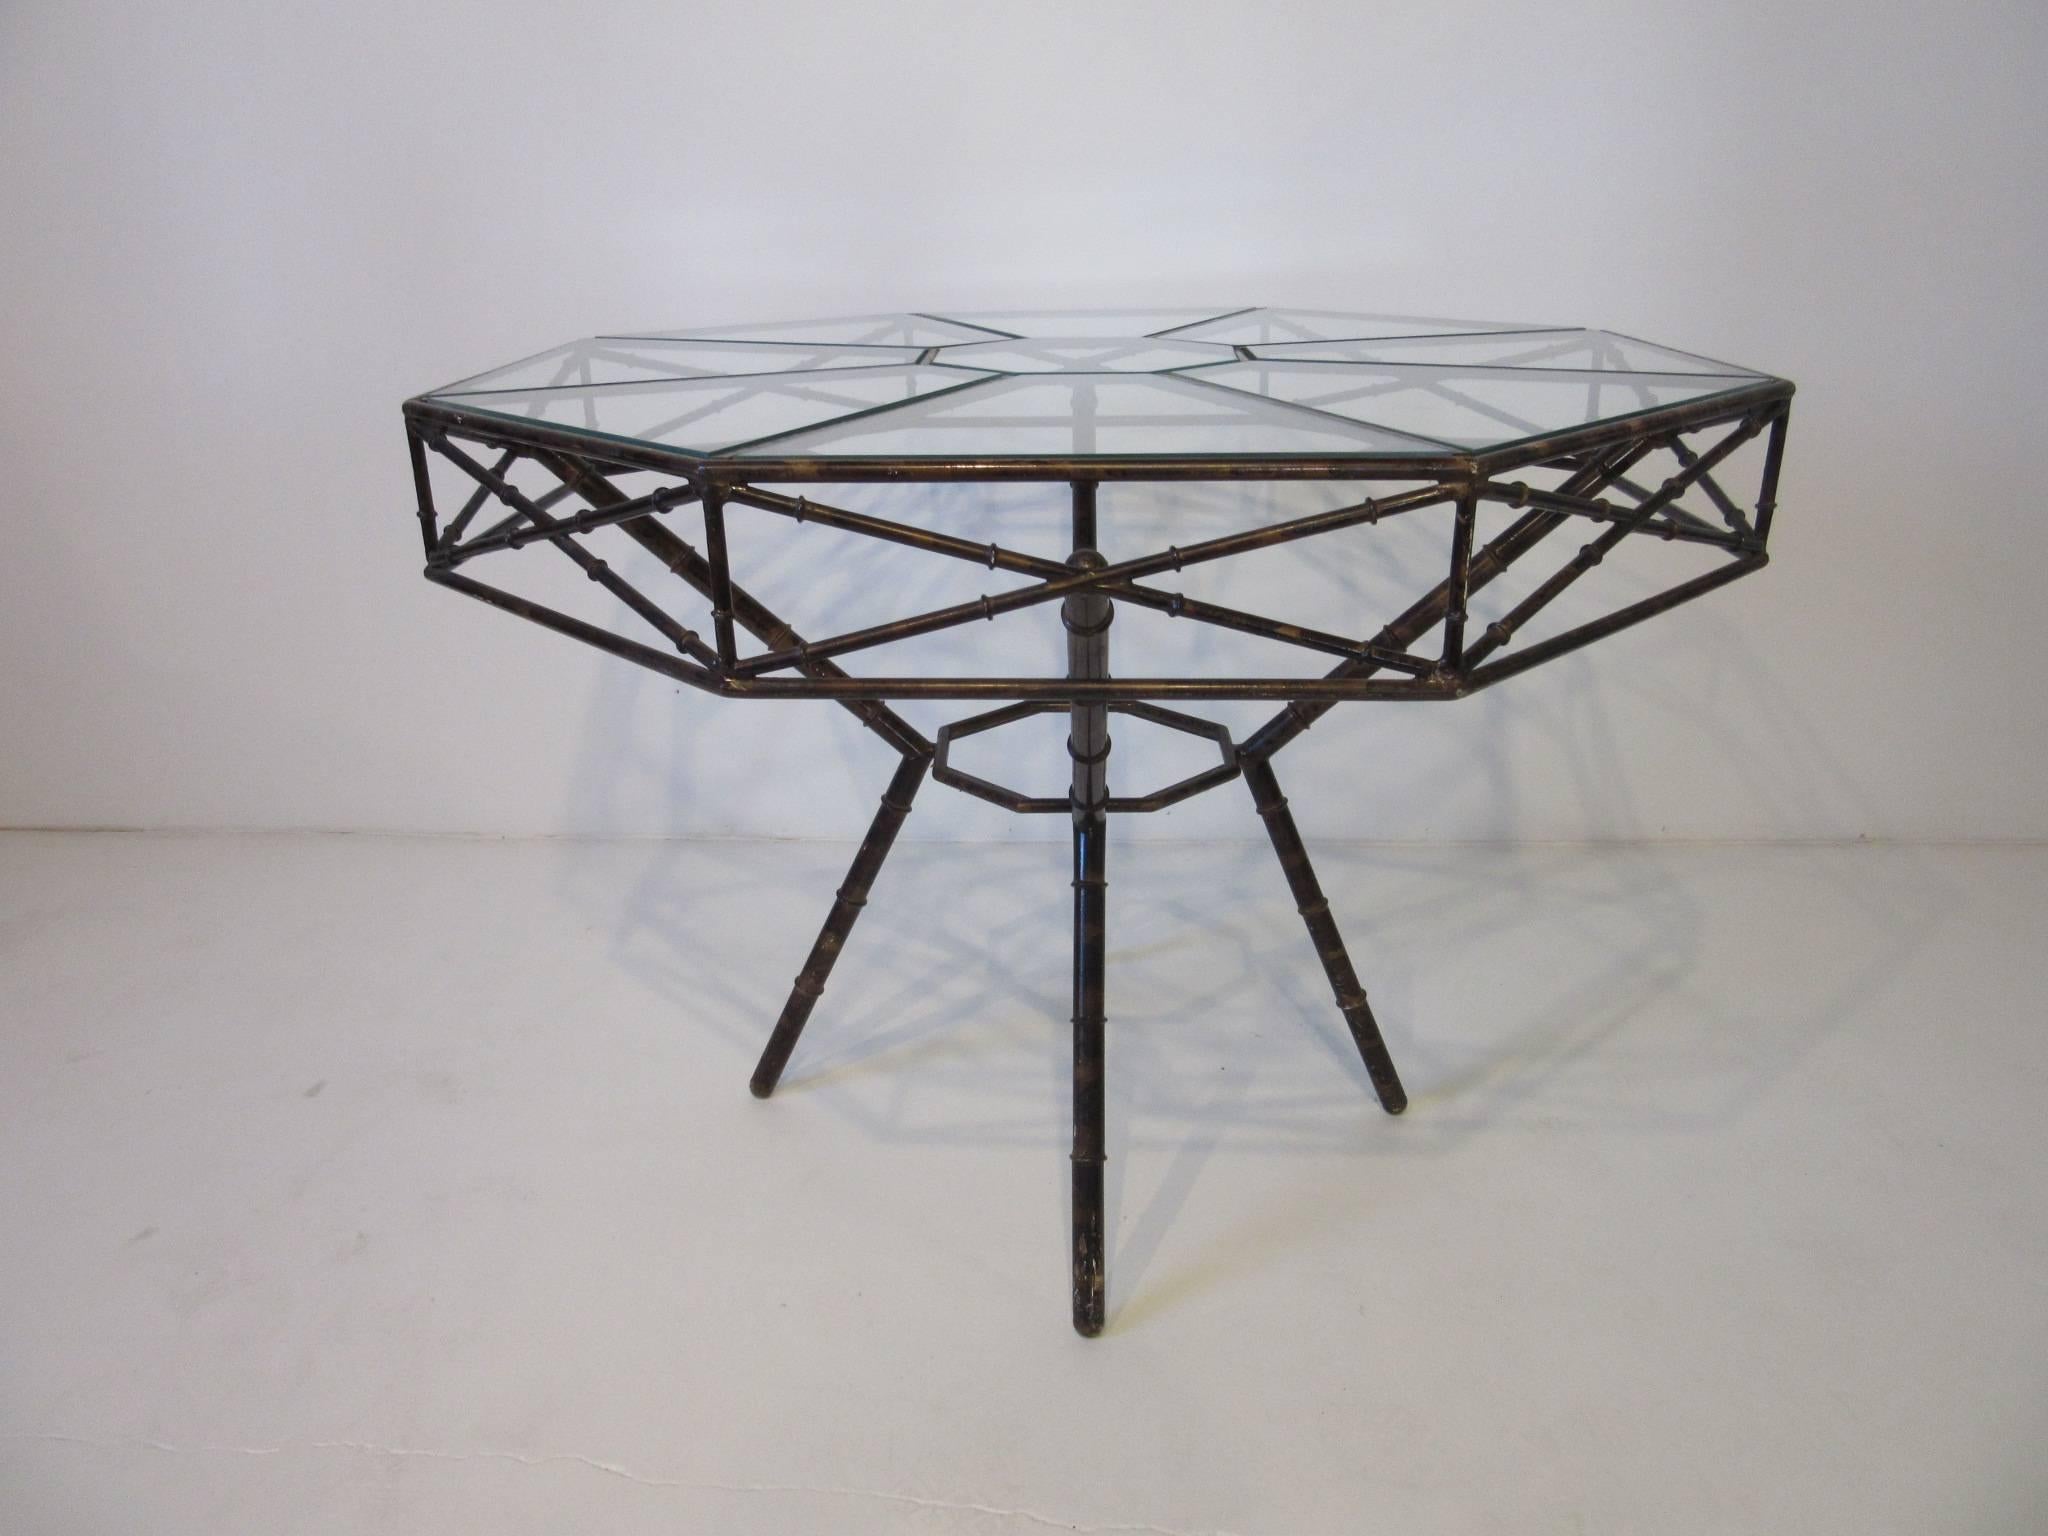 A faux tortoise shell metal table in the style of bamboo with nine separate areas of cut-glass to the top forming a octagon pattern. This work runs throughout the table making it a one of a kind piece for that entry way or dining area.